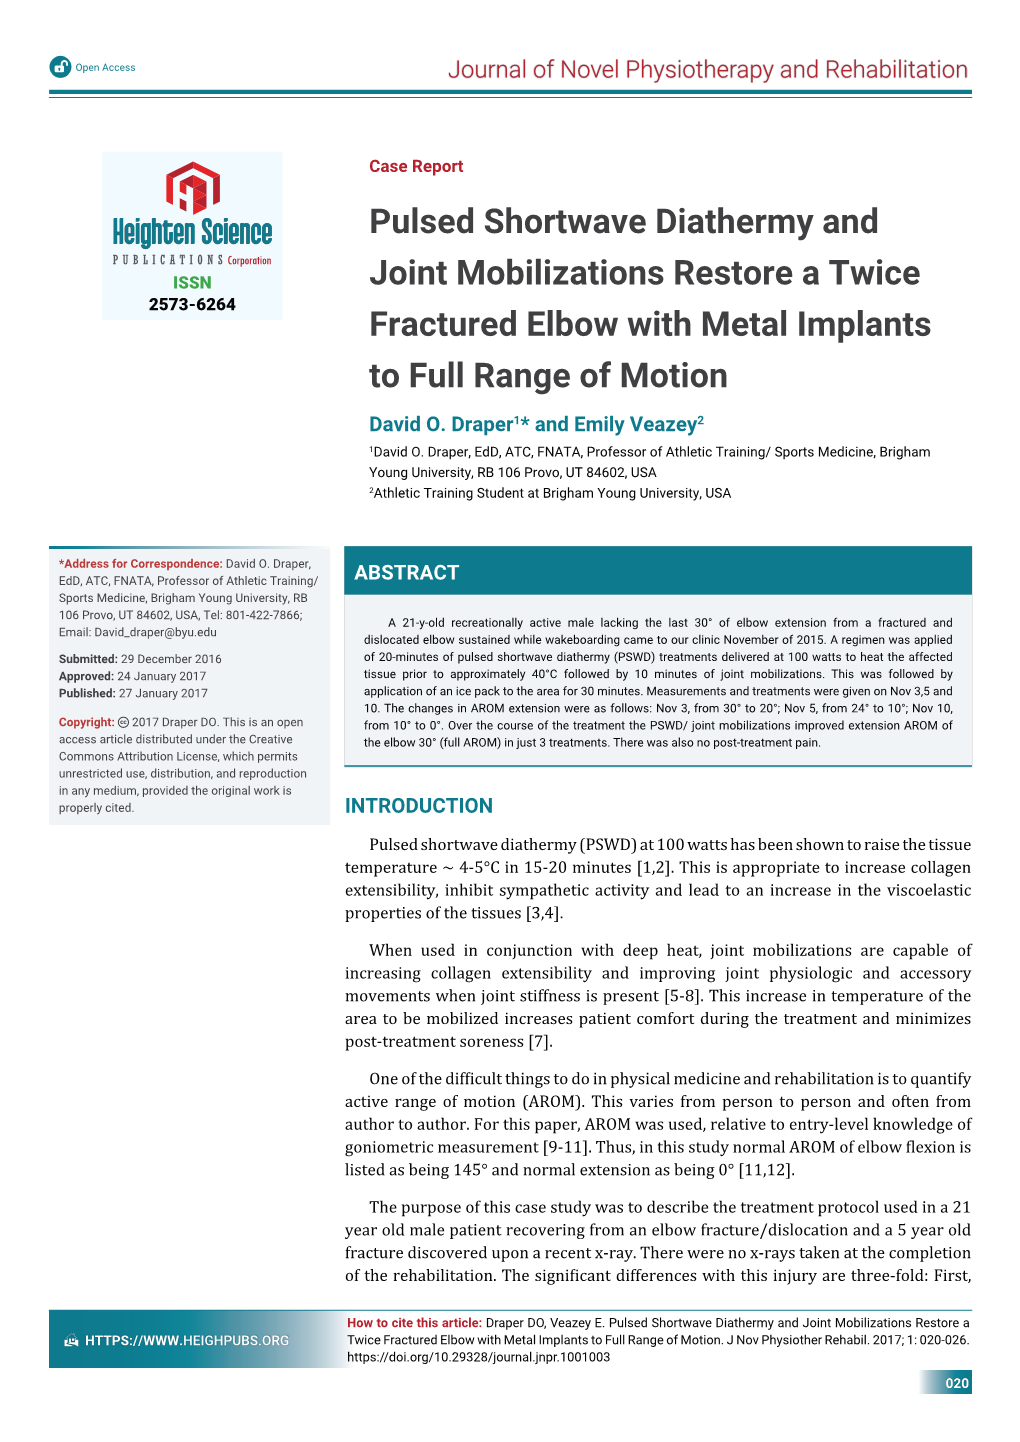 Pulsed Shortwave Diathermy and Joint Mobilizations Restore a Twice Fractured Elbow with Metal Implants to Full Range of Motion